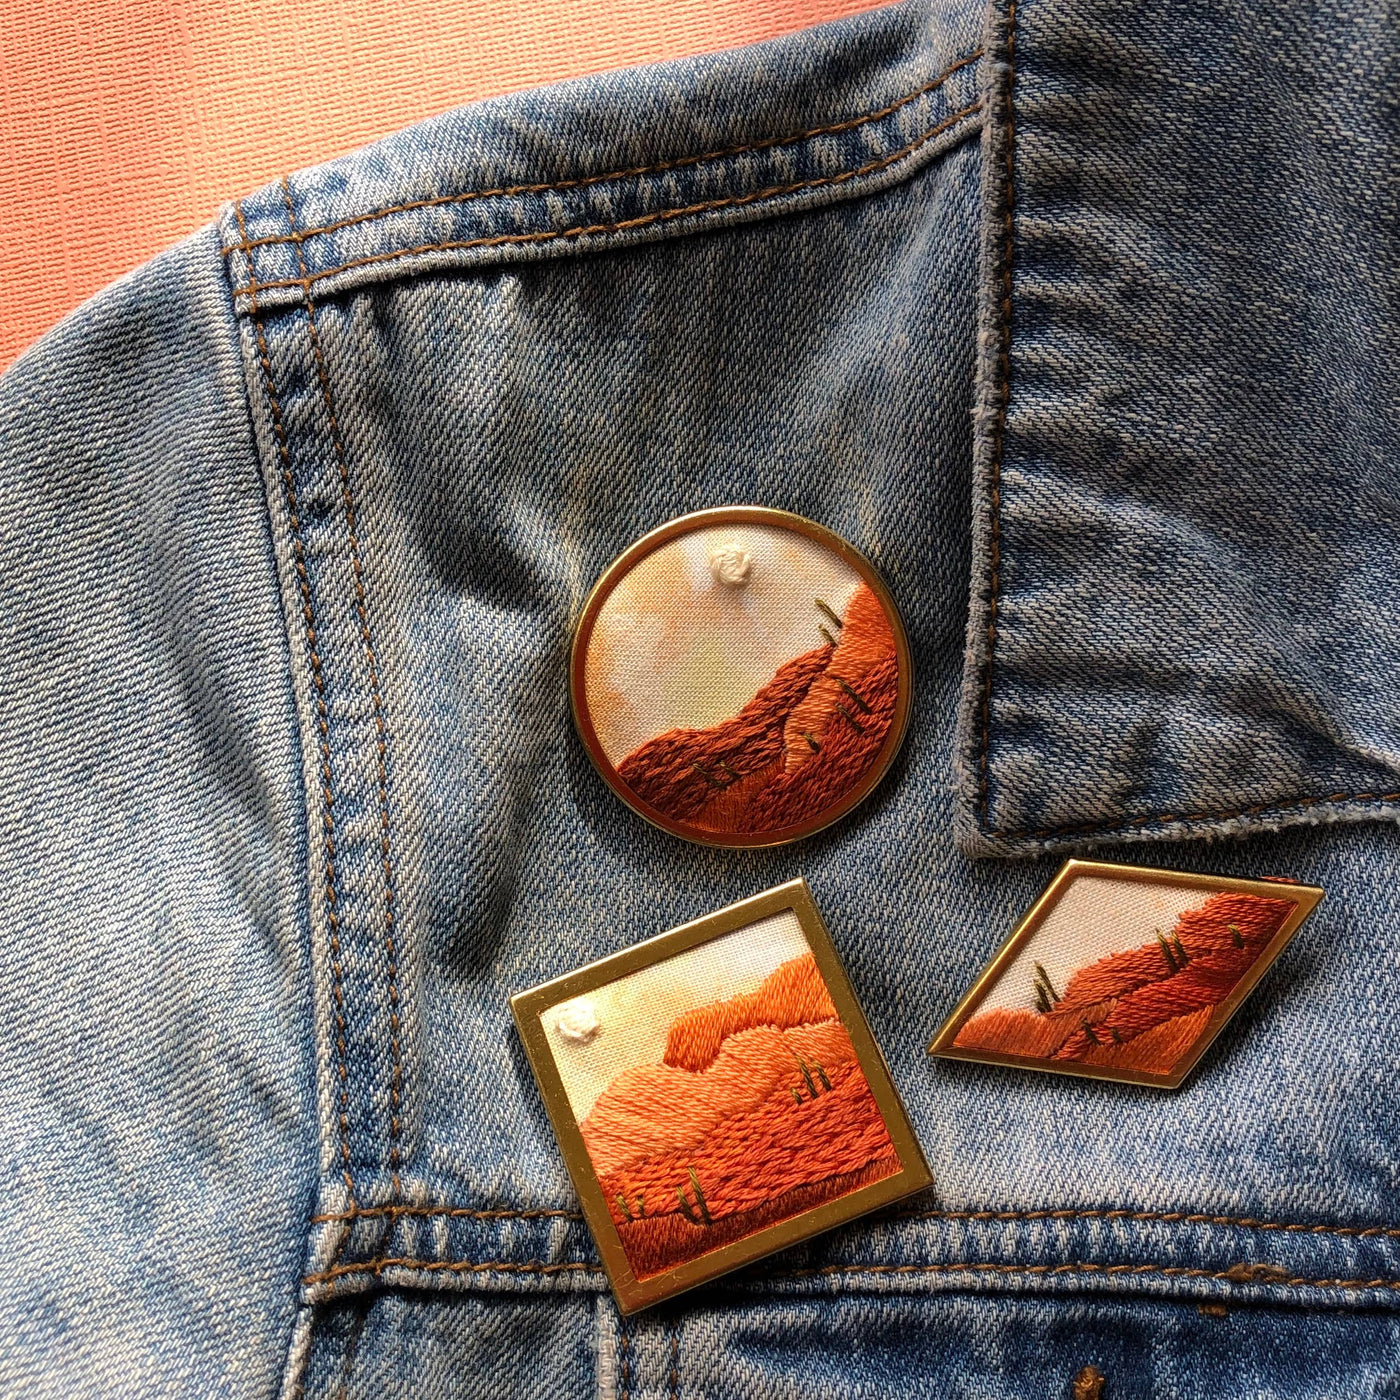 DIY Embroidered Pin Kit - Create A Wearable Desert Landscape